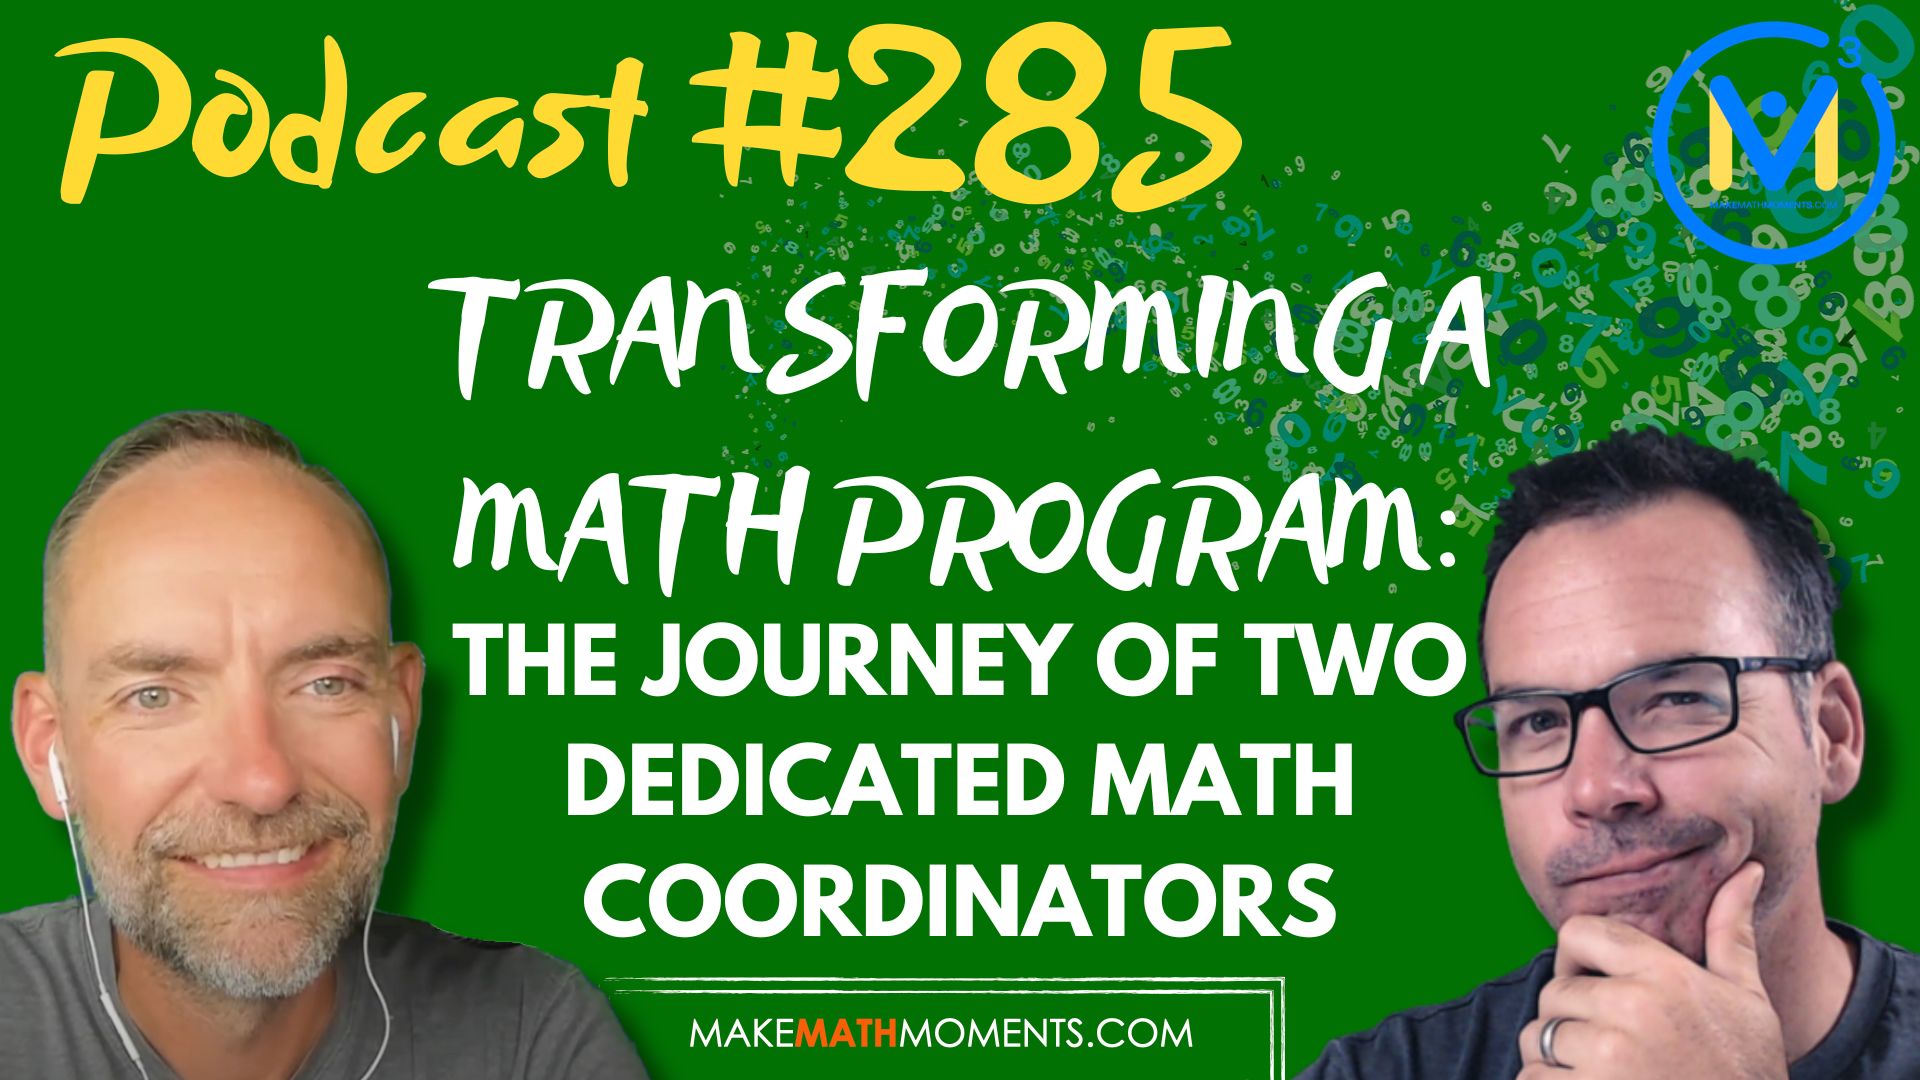 Episode #285: Transforming A Math Program: The Journey of Two Dedicated Math Coordinators